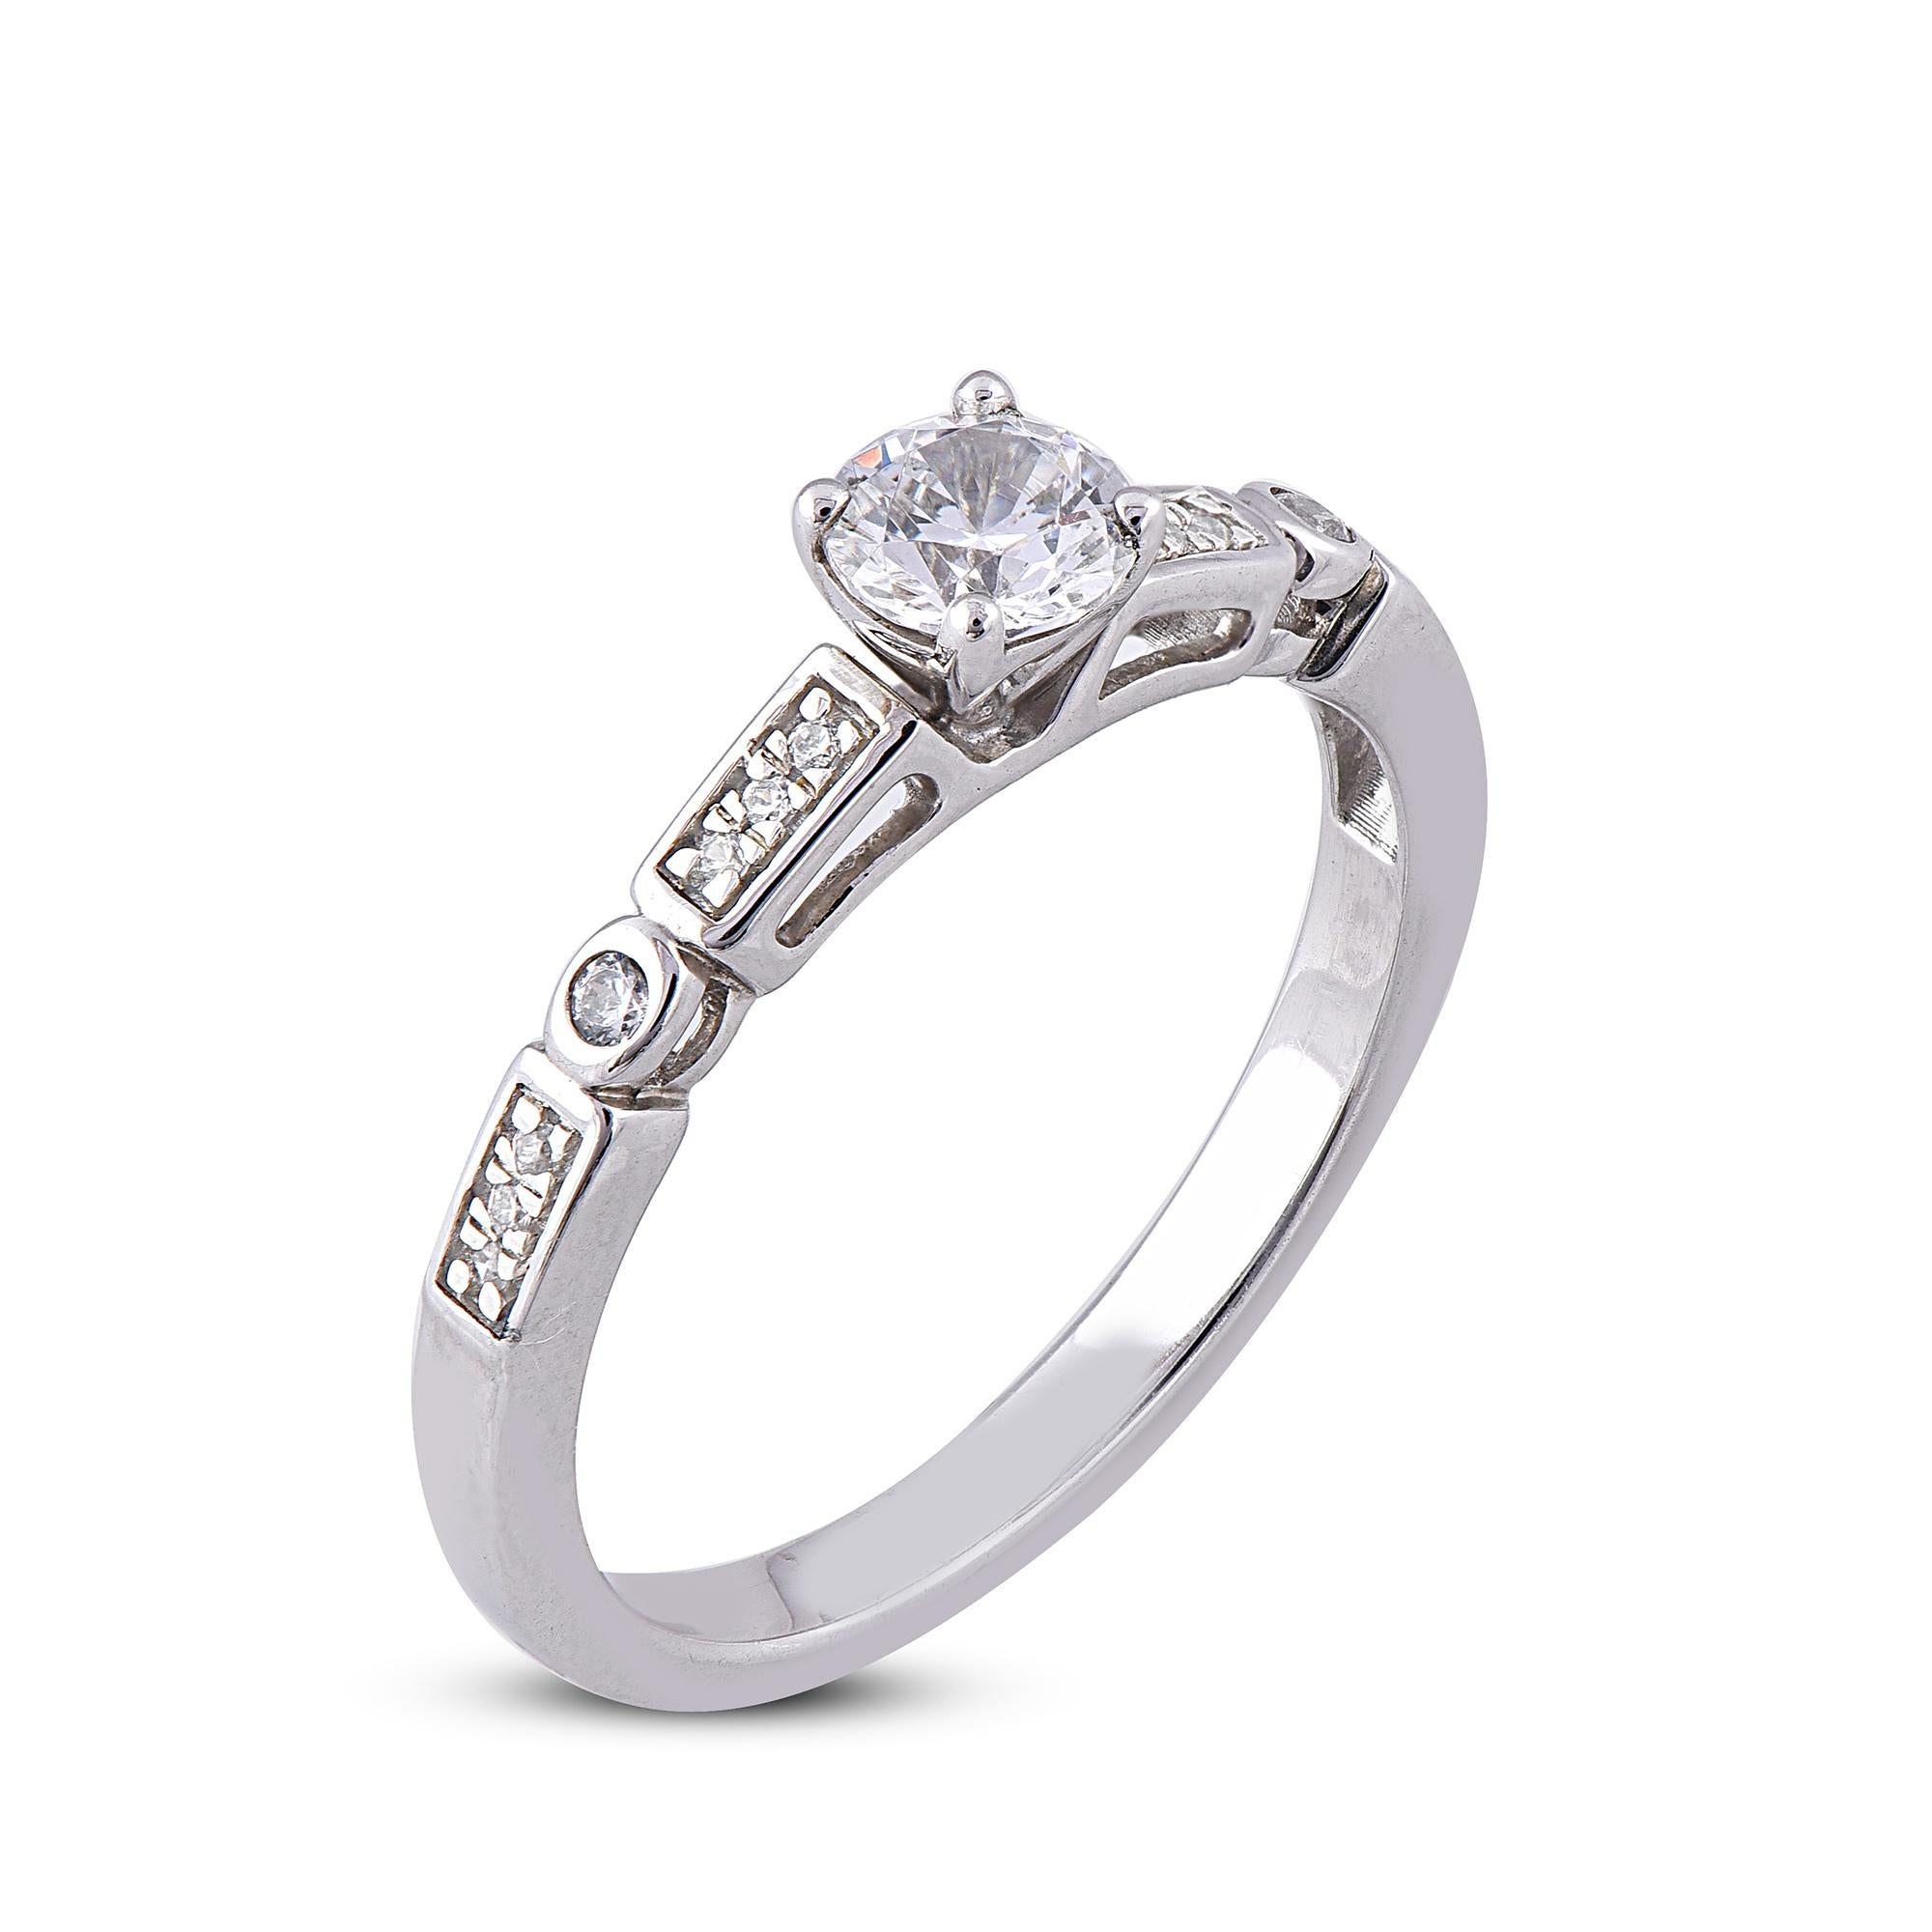 Take glamour to a whole new level with this beautiful White gold diamond engagement ring. Fashionated with 18 Karat White gold with 15 round diamonds accentuated in pave, prong and Bezel setting. We only use natural, 100% conflict free diamonds